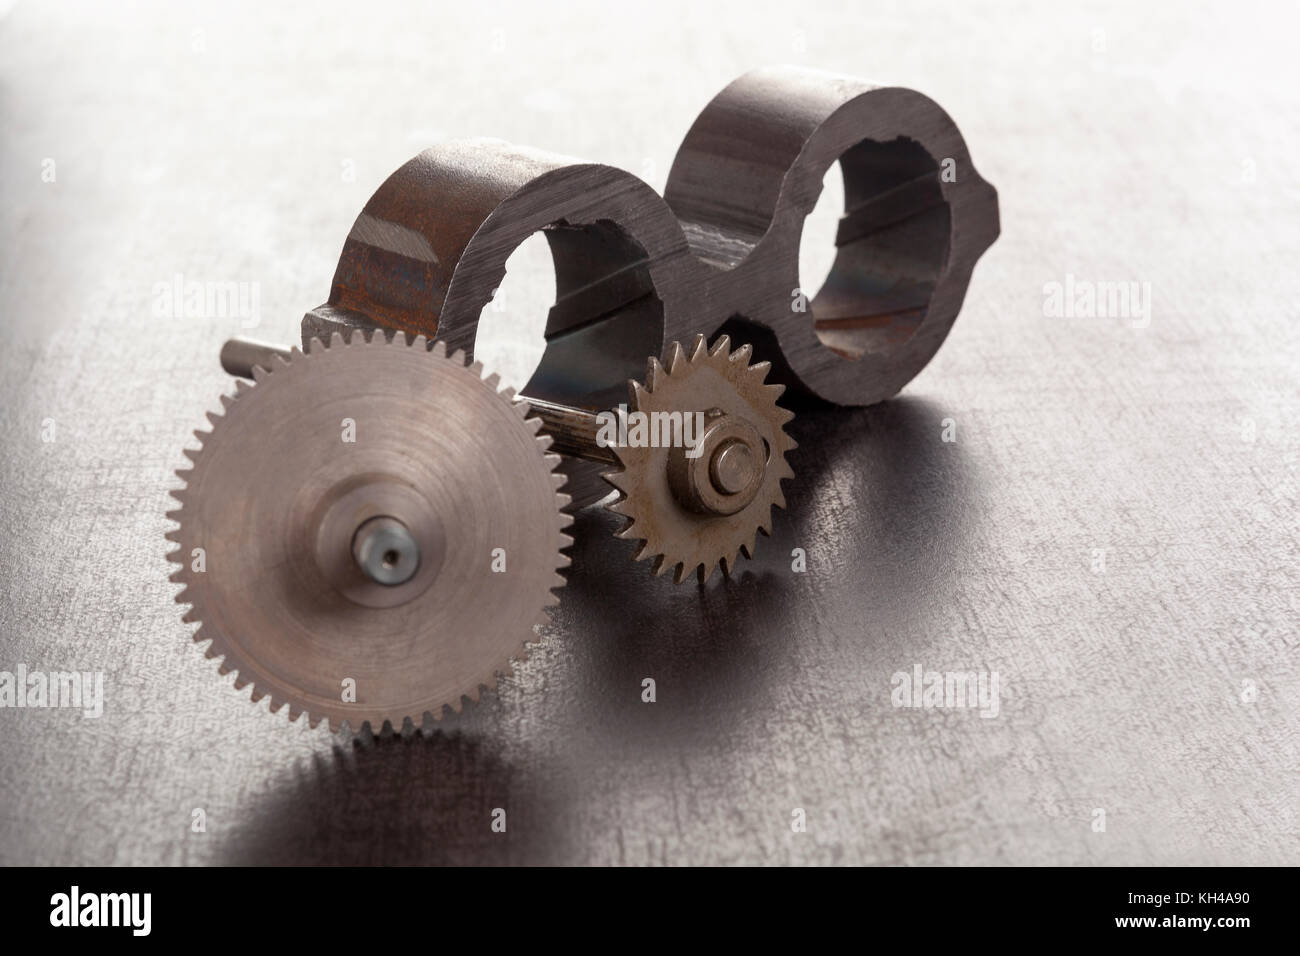 Cogwheels and mechanical component on concrete. Stock Photo